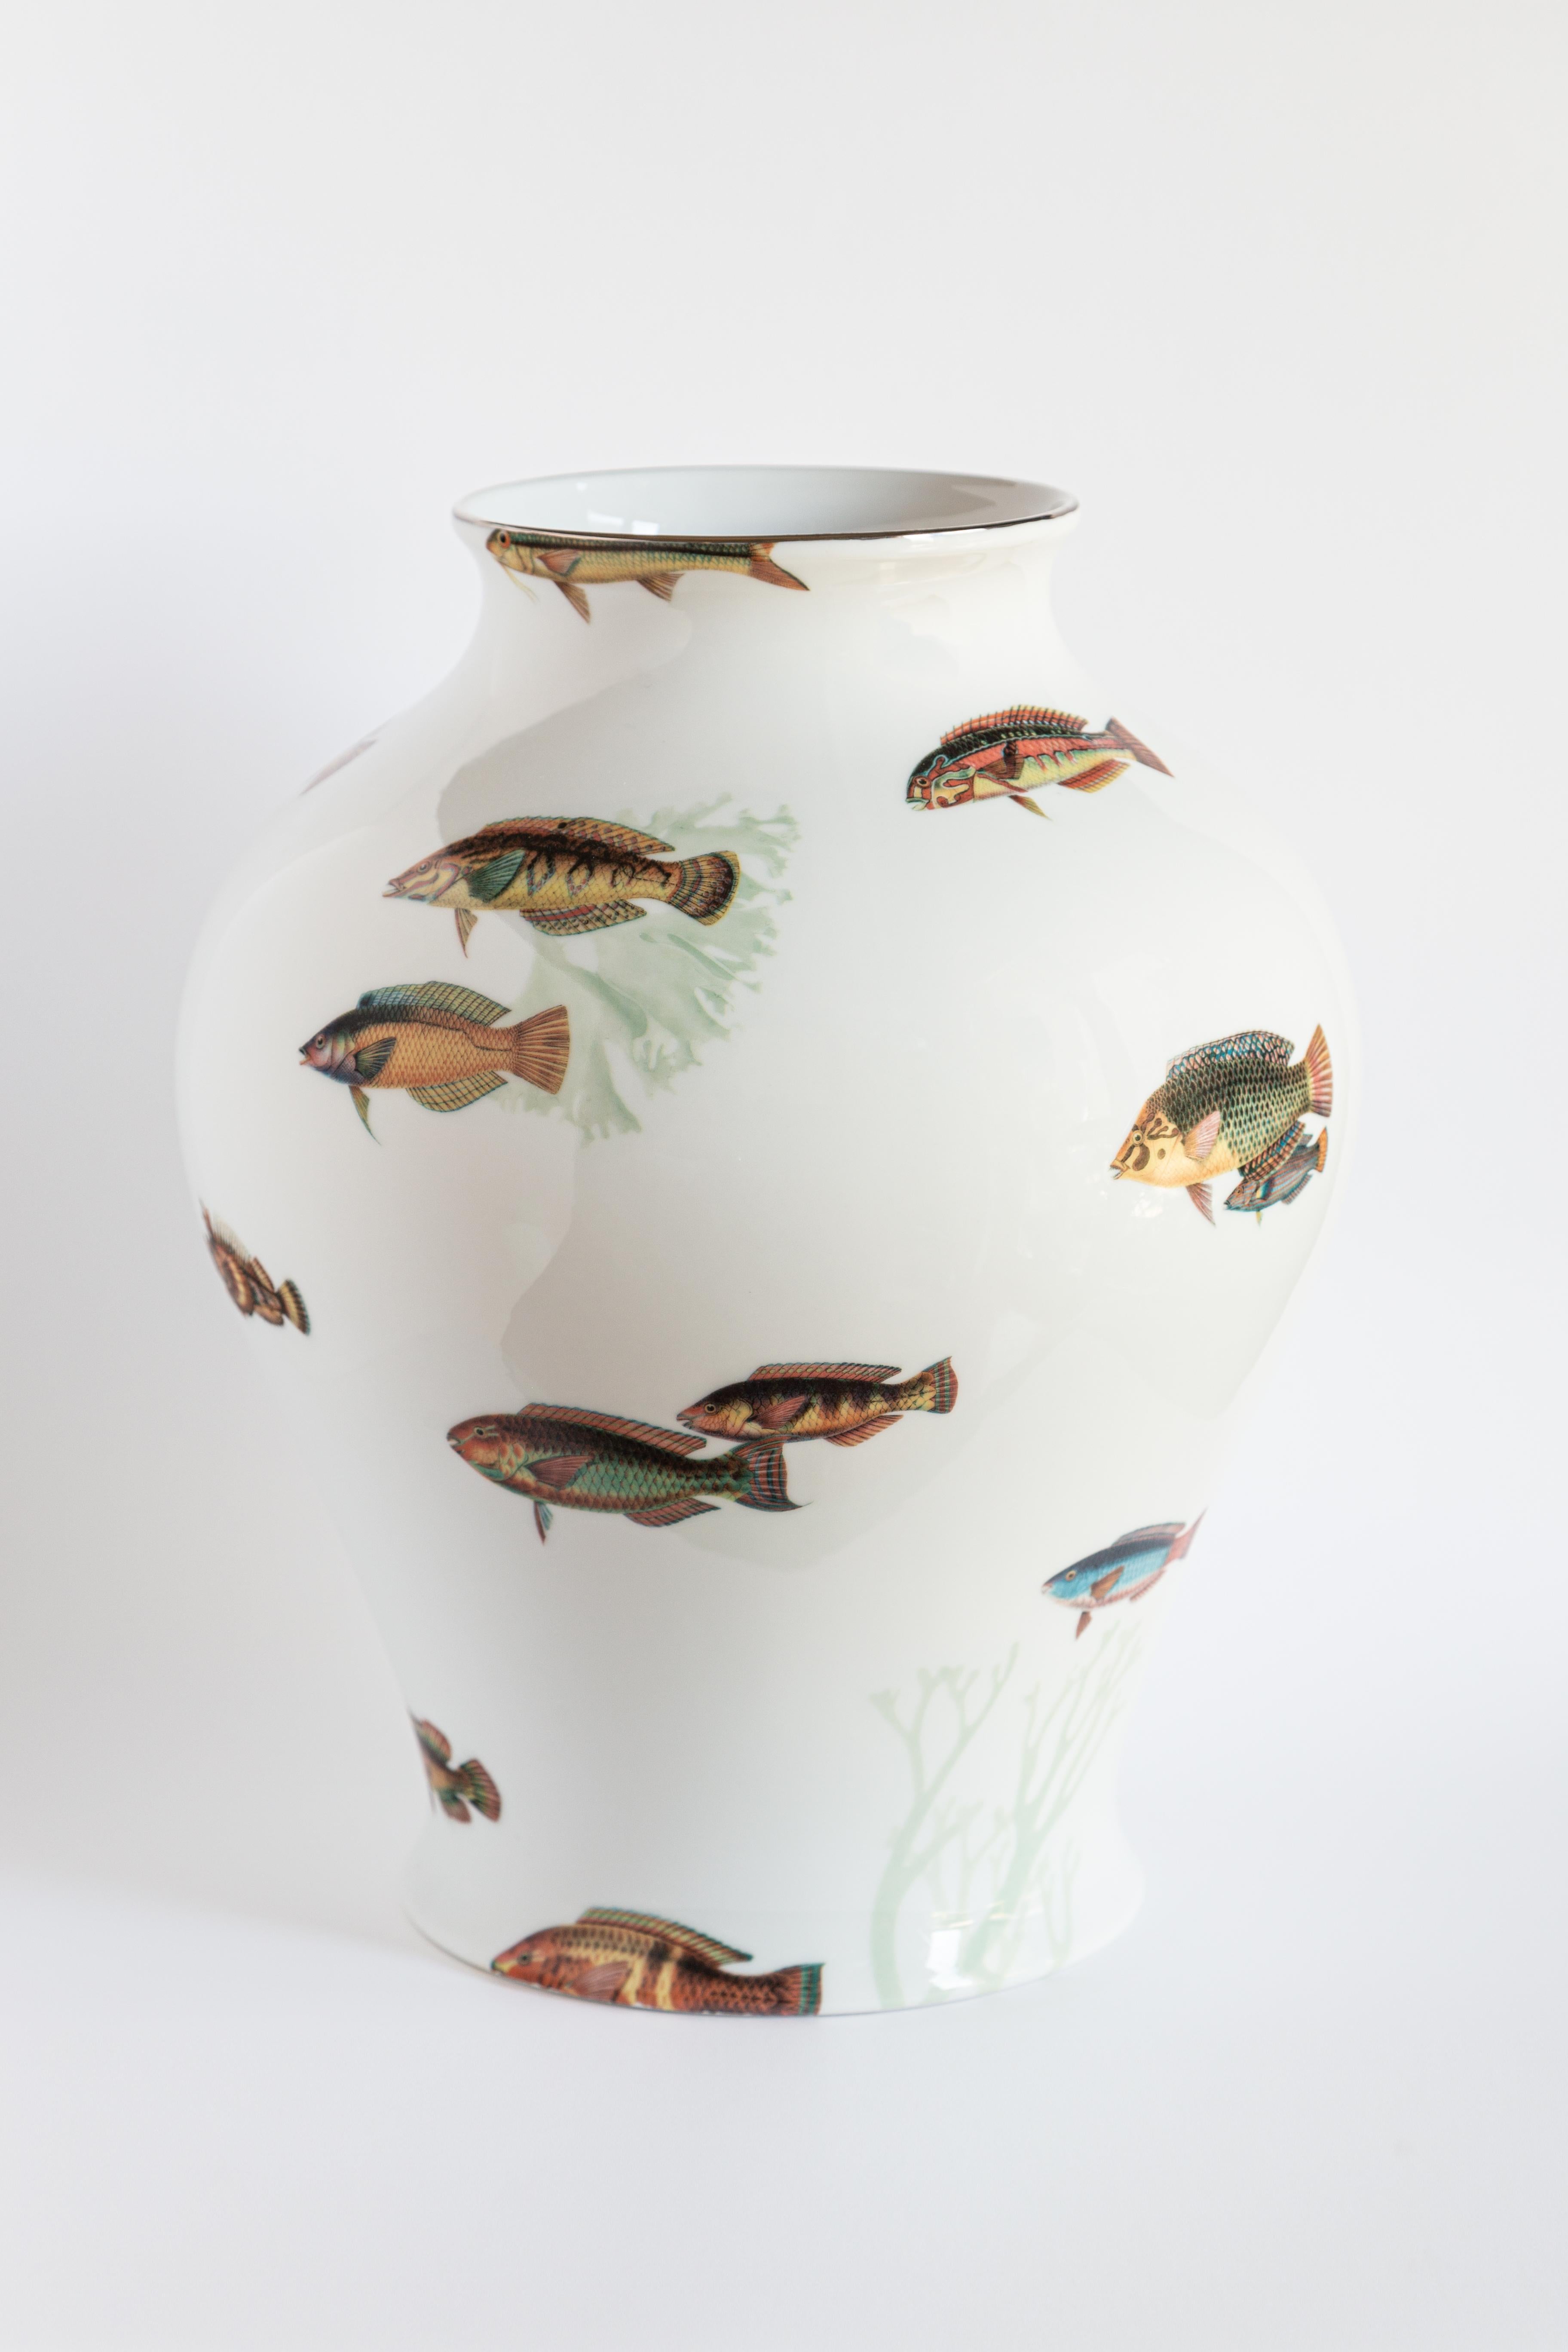 The Classic design of this porcelain vase comes back to life with retro decorations with a contemporary flavor. The coral reef of the Amami Islands, near Japan, inspires this design where tropical fishes plays around the surface of the vase.